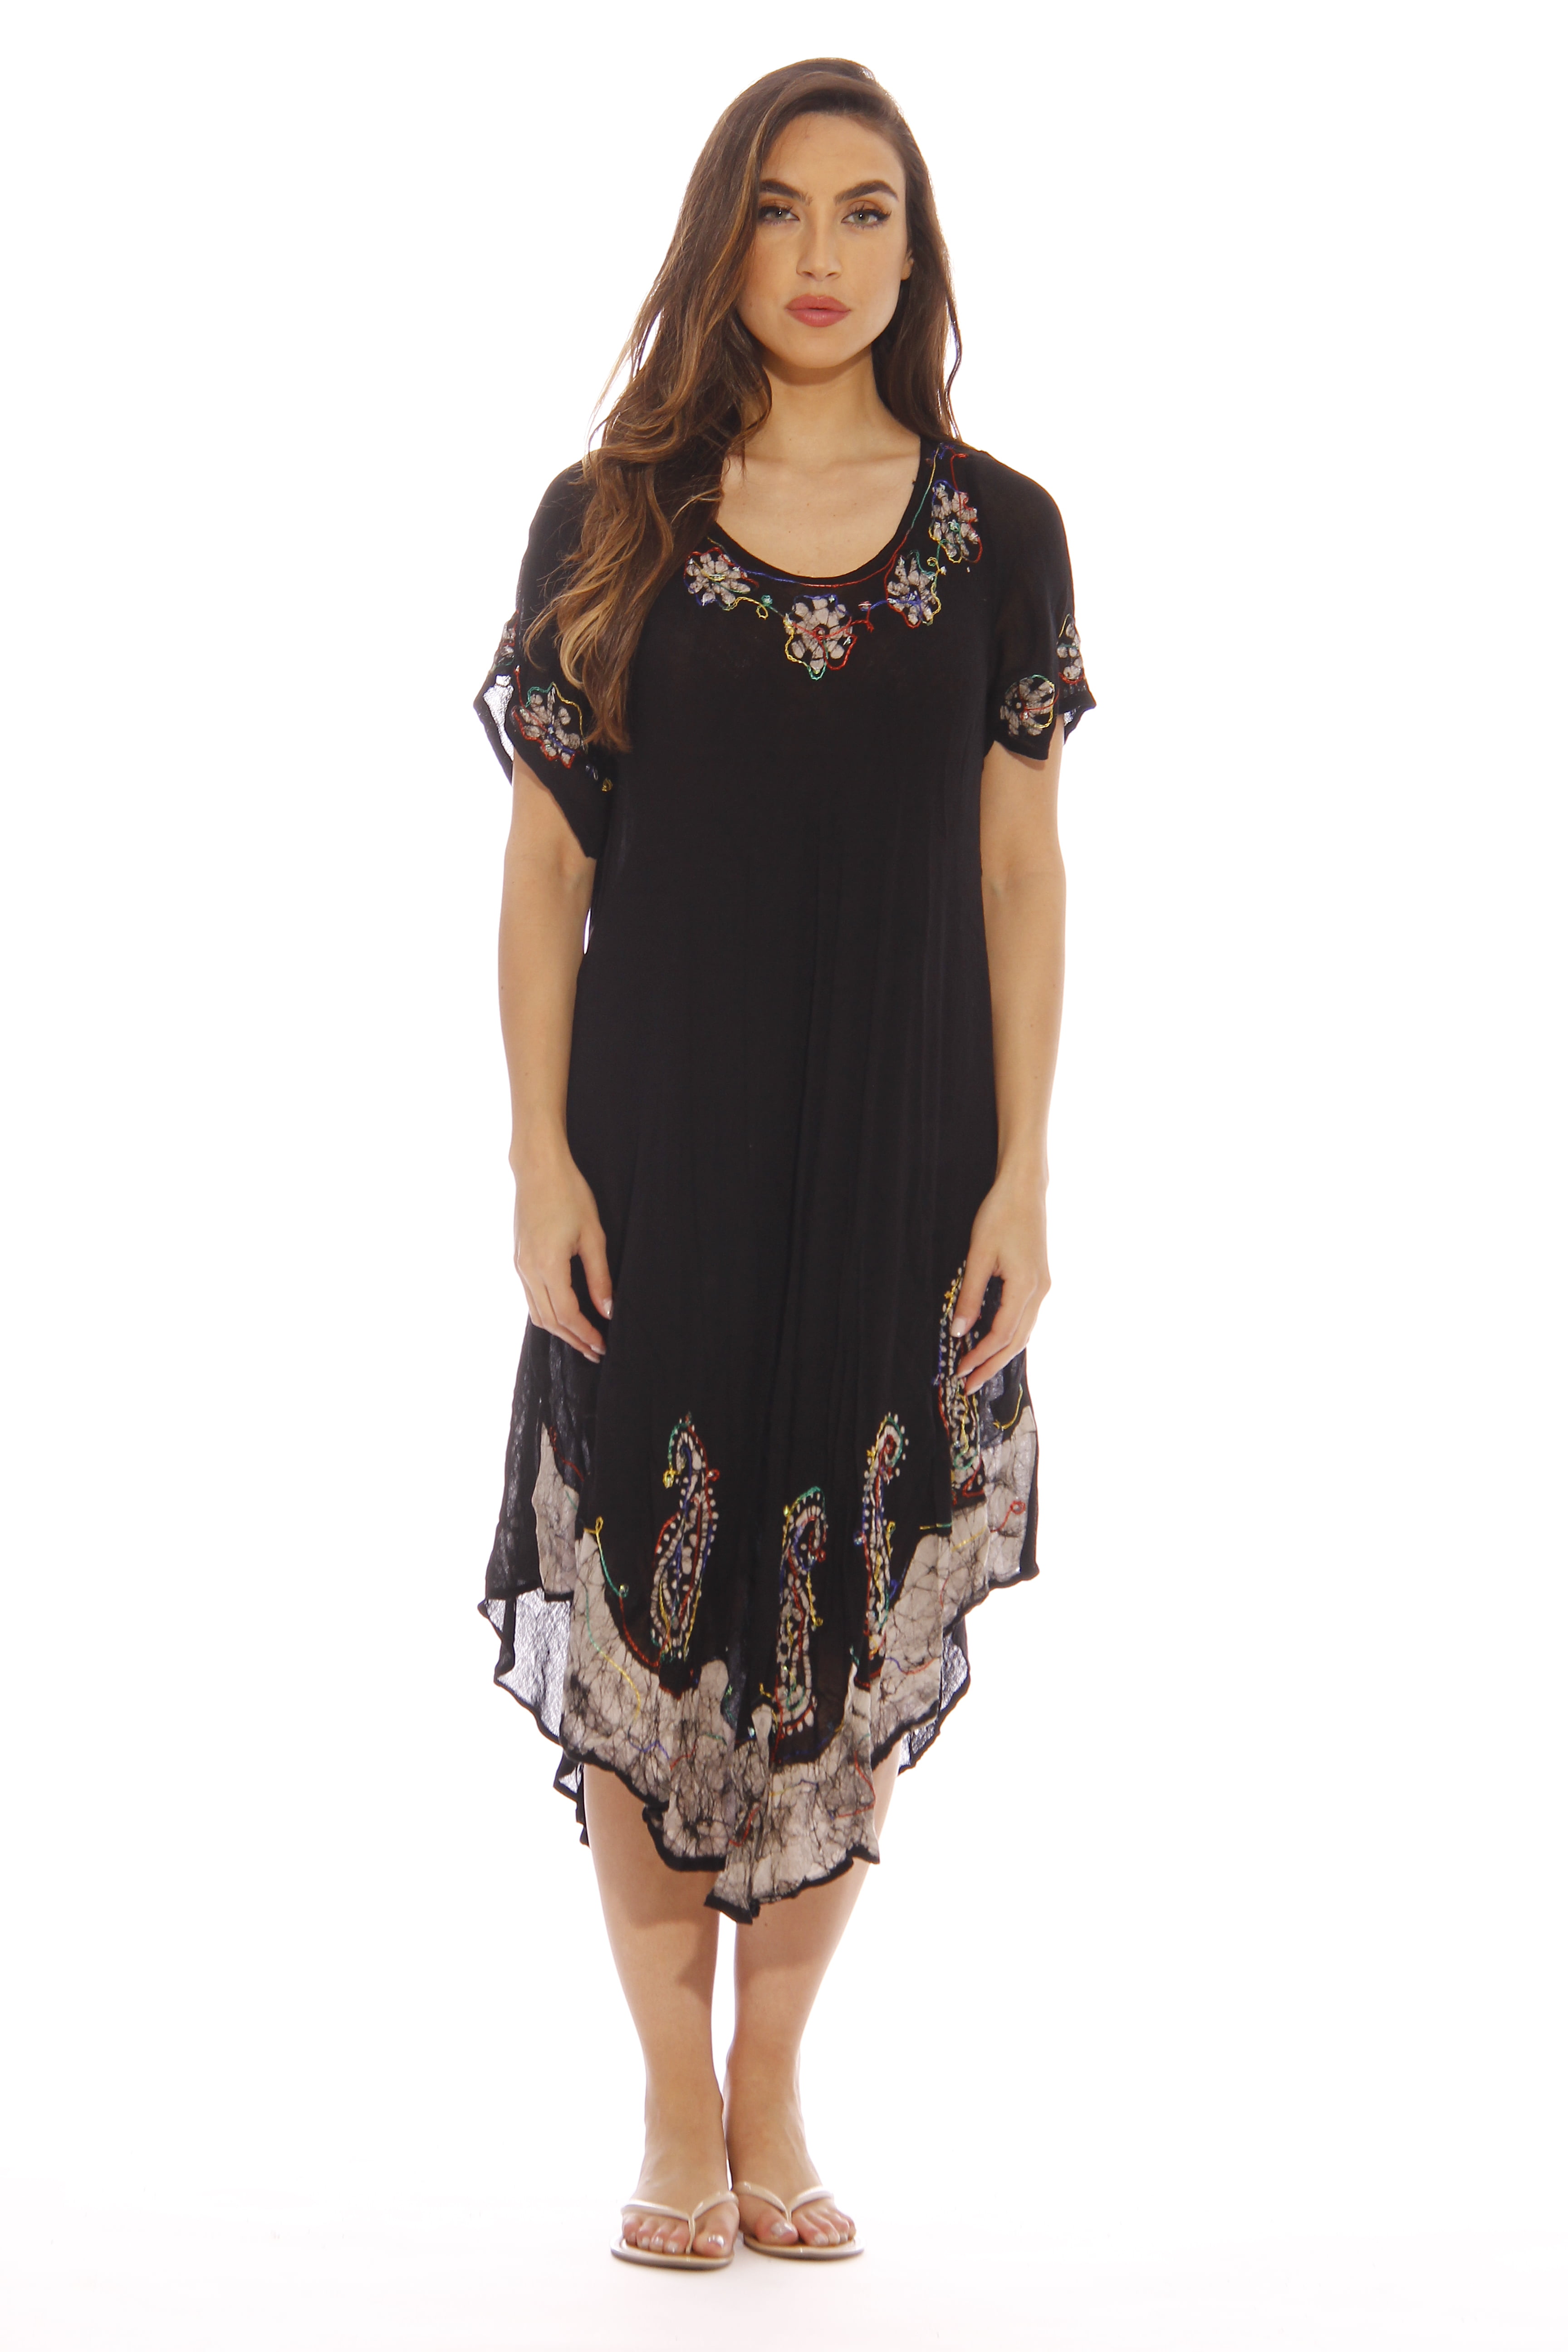 Just Love Summer Dresses Plus Size / Swimsuit Cover Up / Resort Wear ...